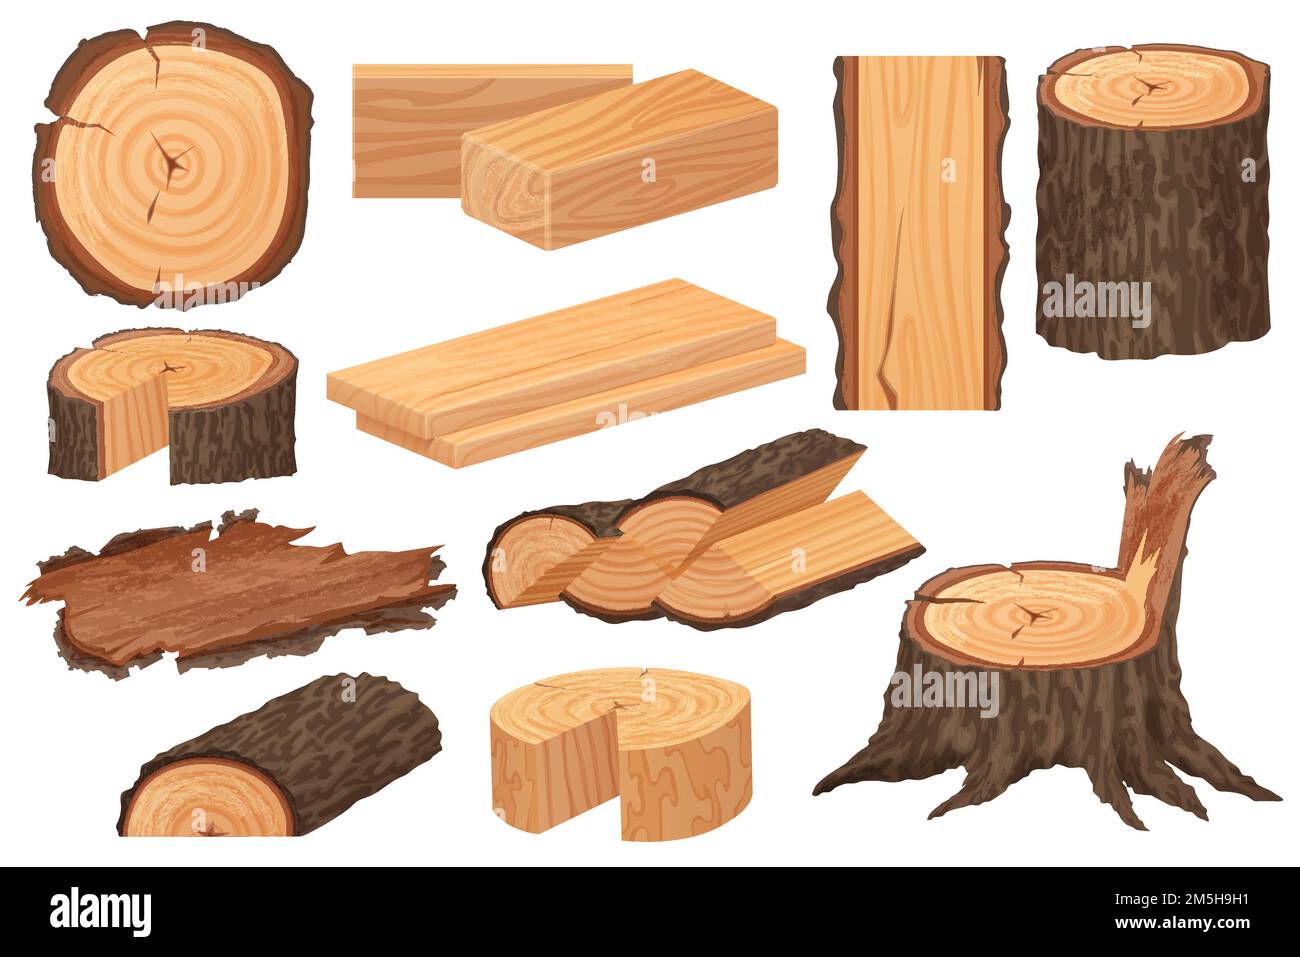 Wood industry raw materials. Tree trunk, logs, trunks, woodwork planks, stumps, lumber branch Stock Vector